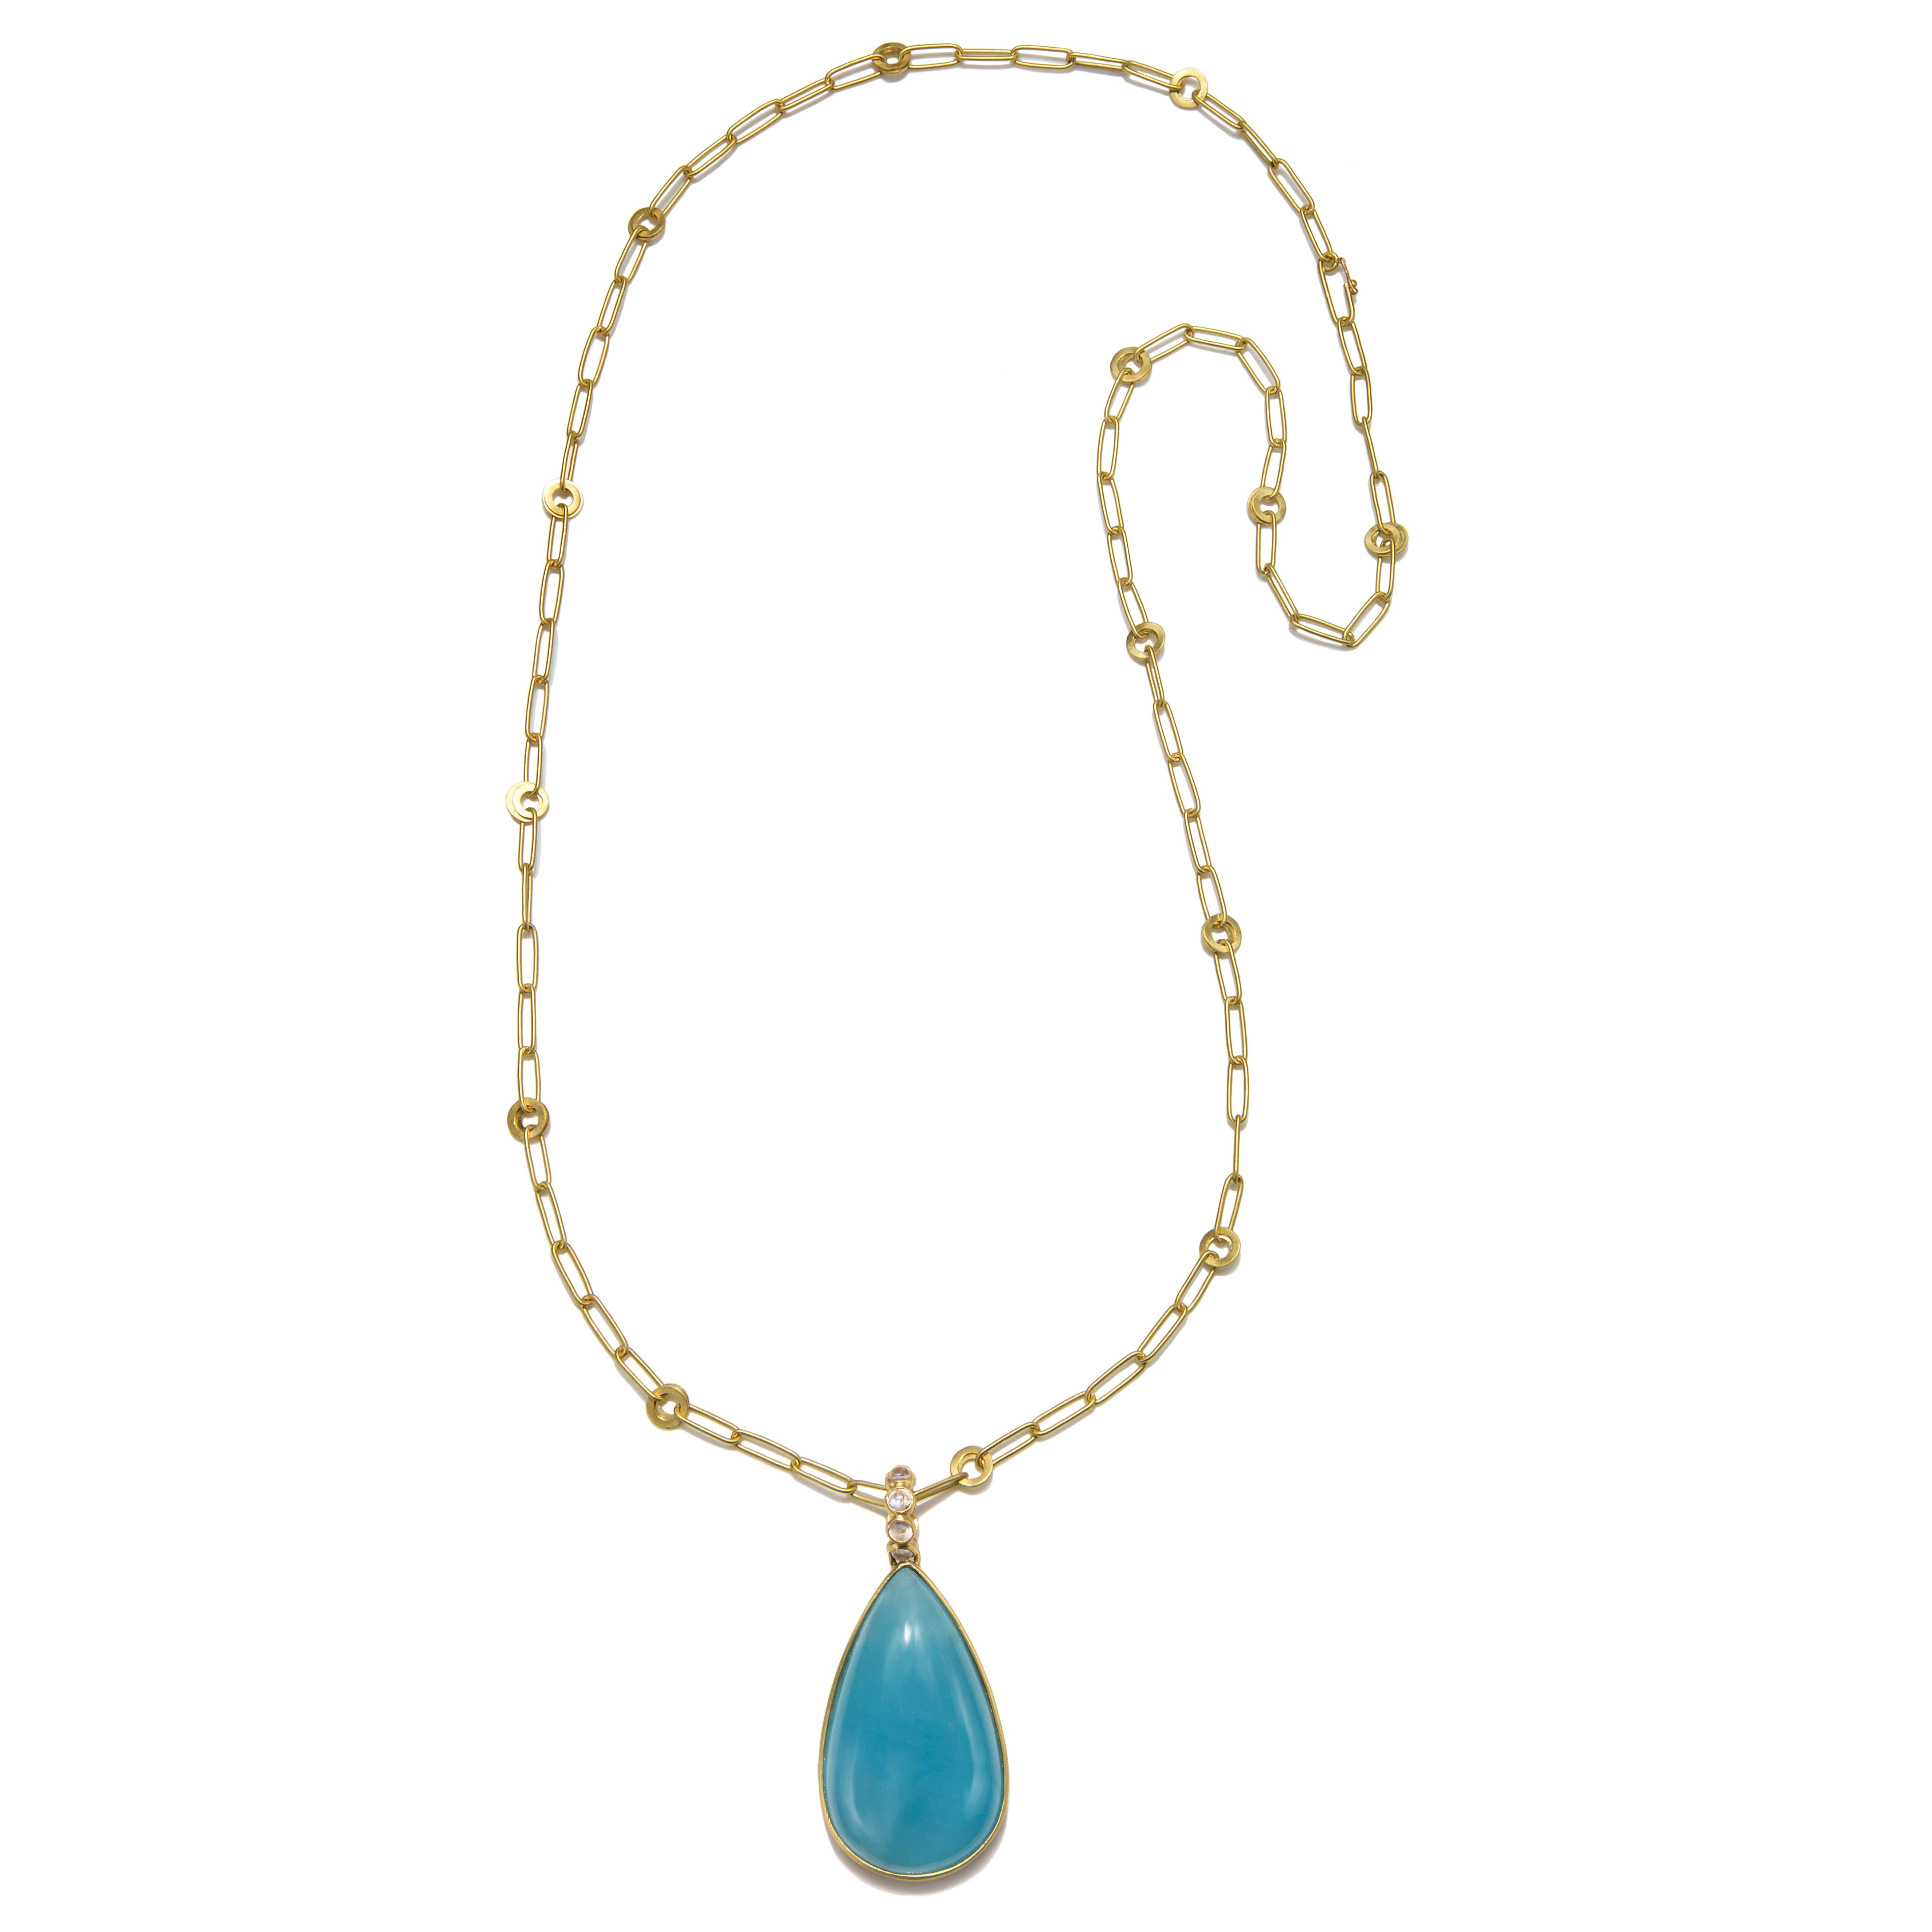 One of a kind, pear-shaped milky Aquamarine set in 18k gold. Finely crafted, the bail features moonstone cabochons to accentuate and highlight the beauty of the milky aquamarine cabochon. Slight natural inclusions.

Aquamarine = 108 carats
Pendant